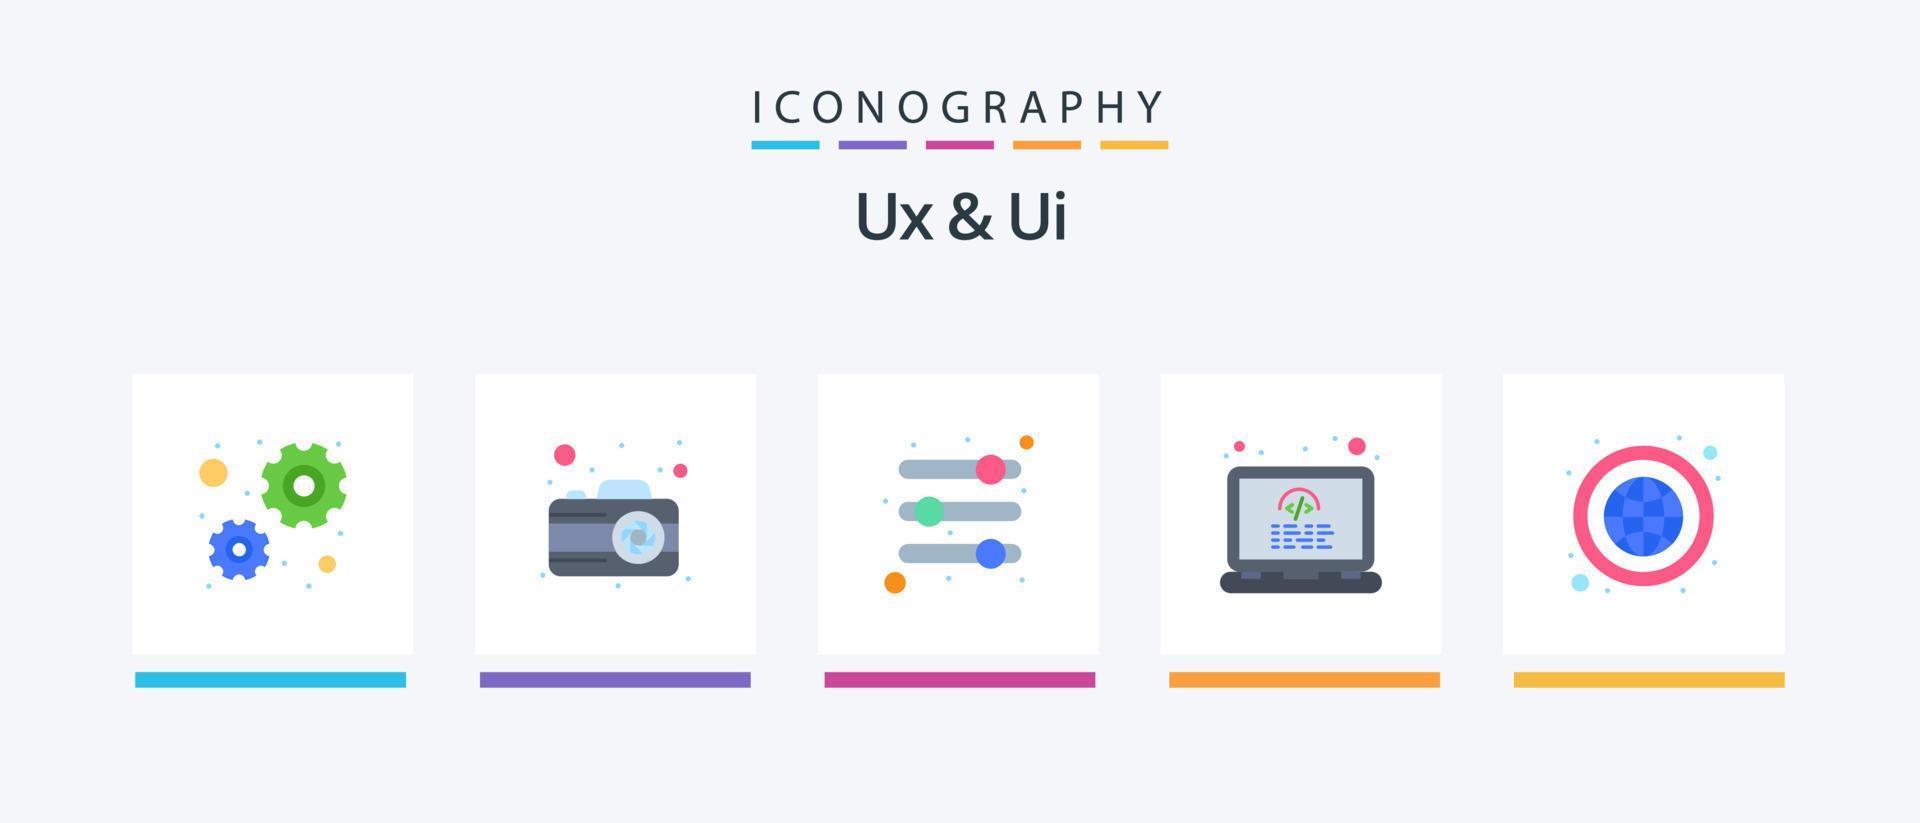 Ux And Ui Flat 5 Icon Pack Including network. earth. volume. laptop. programming. Creative Icons Design vector